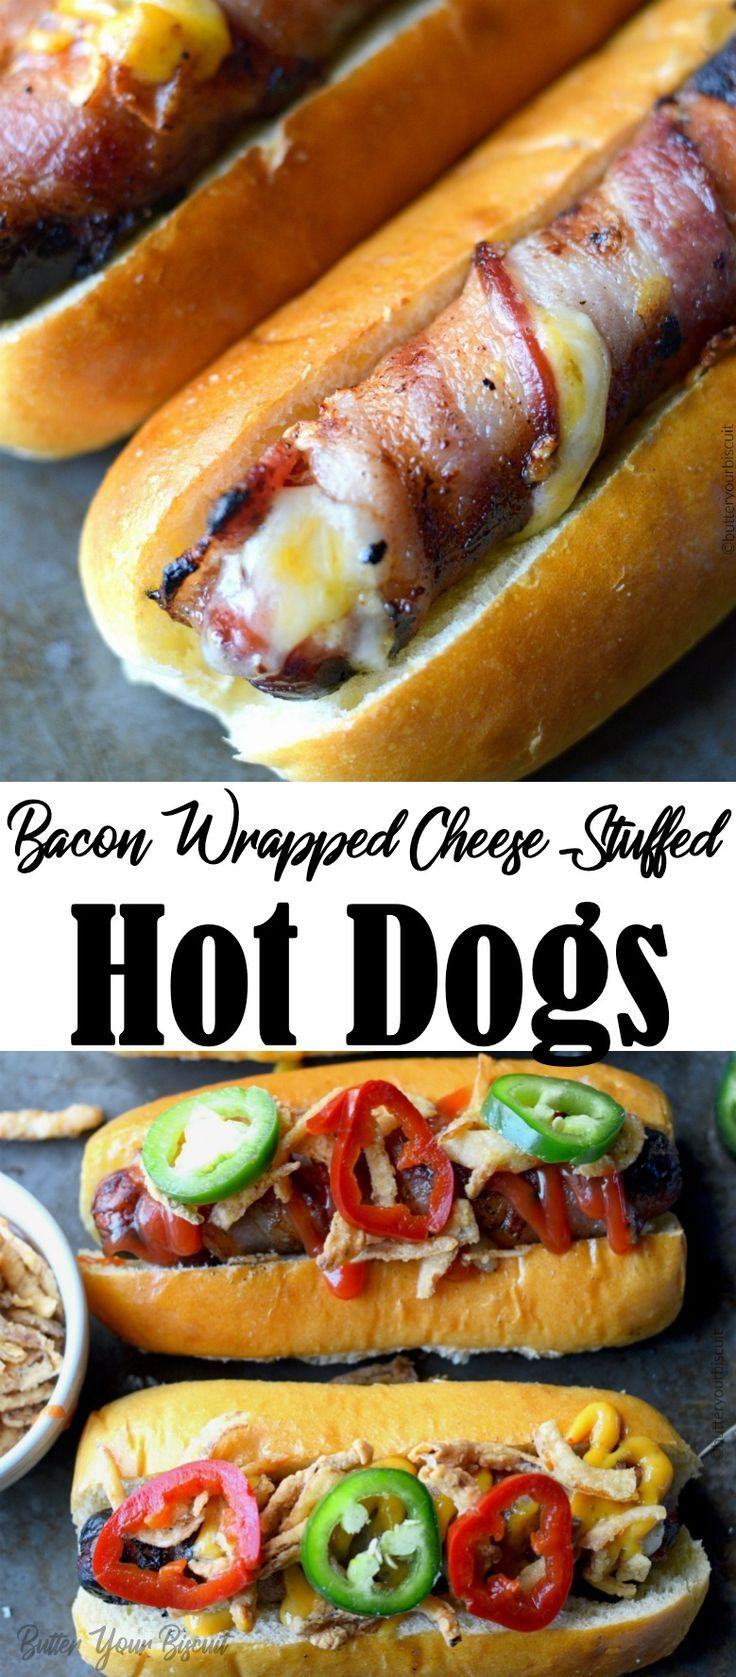 Bacon Wrapped Hot Dog Appetizers
 Bacon Wrapped Cheese Stuffed Hot Dogs with Crispy ions